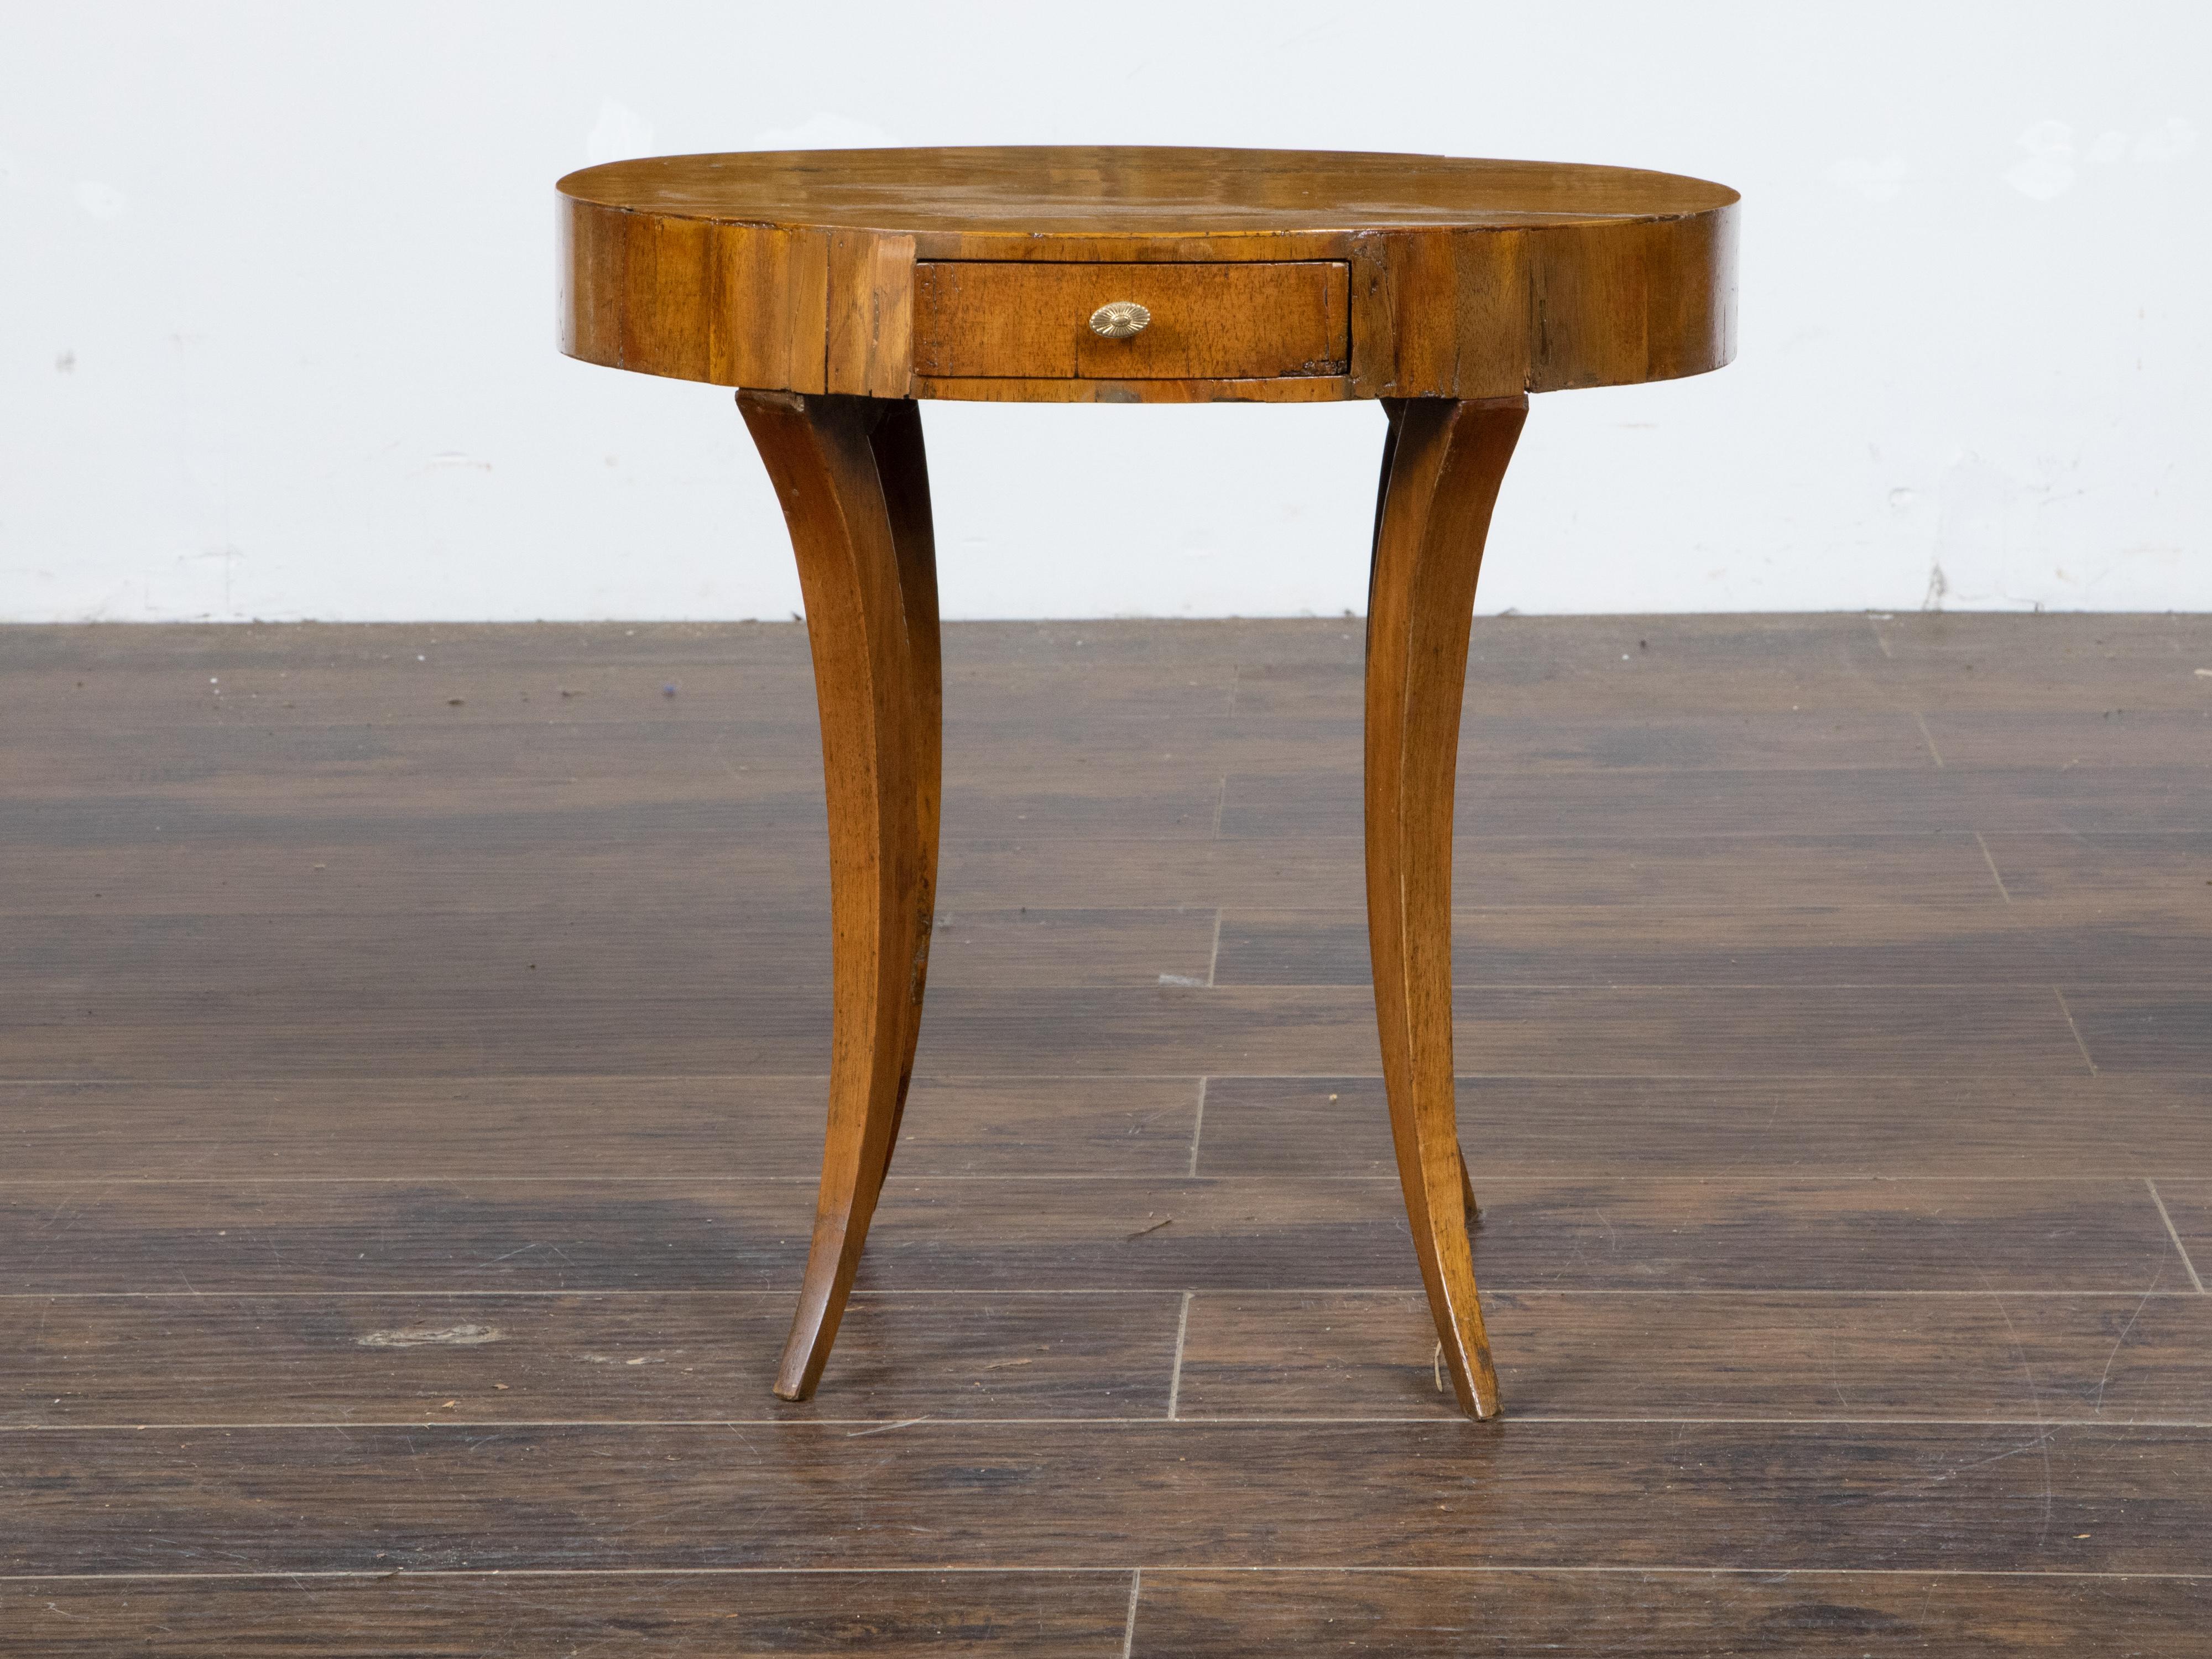 19th Century Italian Neoclassical 1810s Walnut Table with Oval Top, Drawer and Saber Legs For Sale